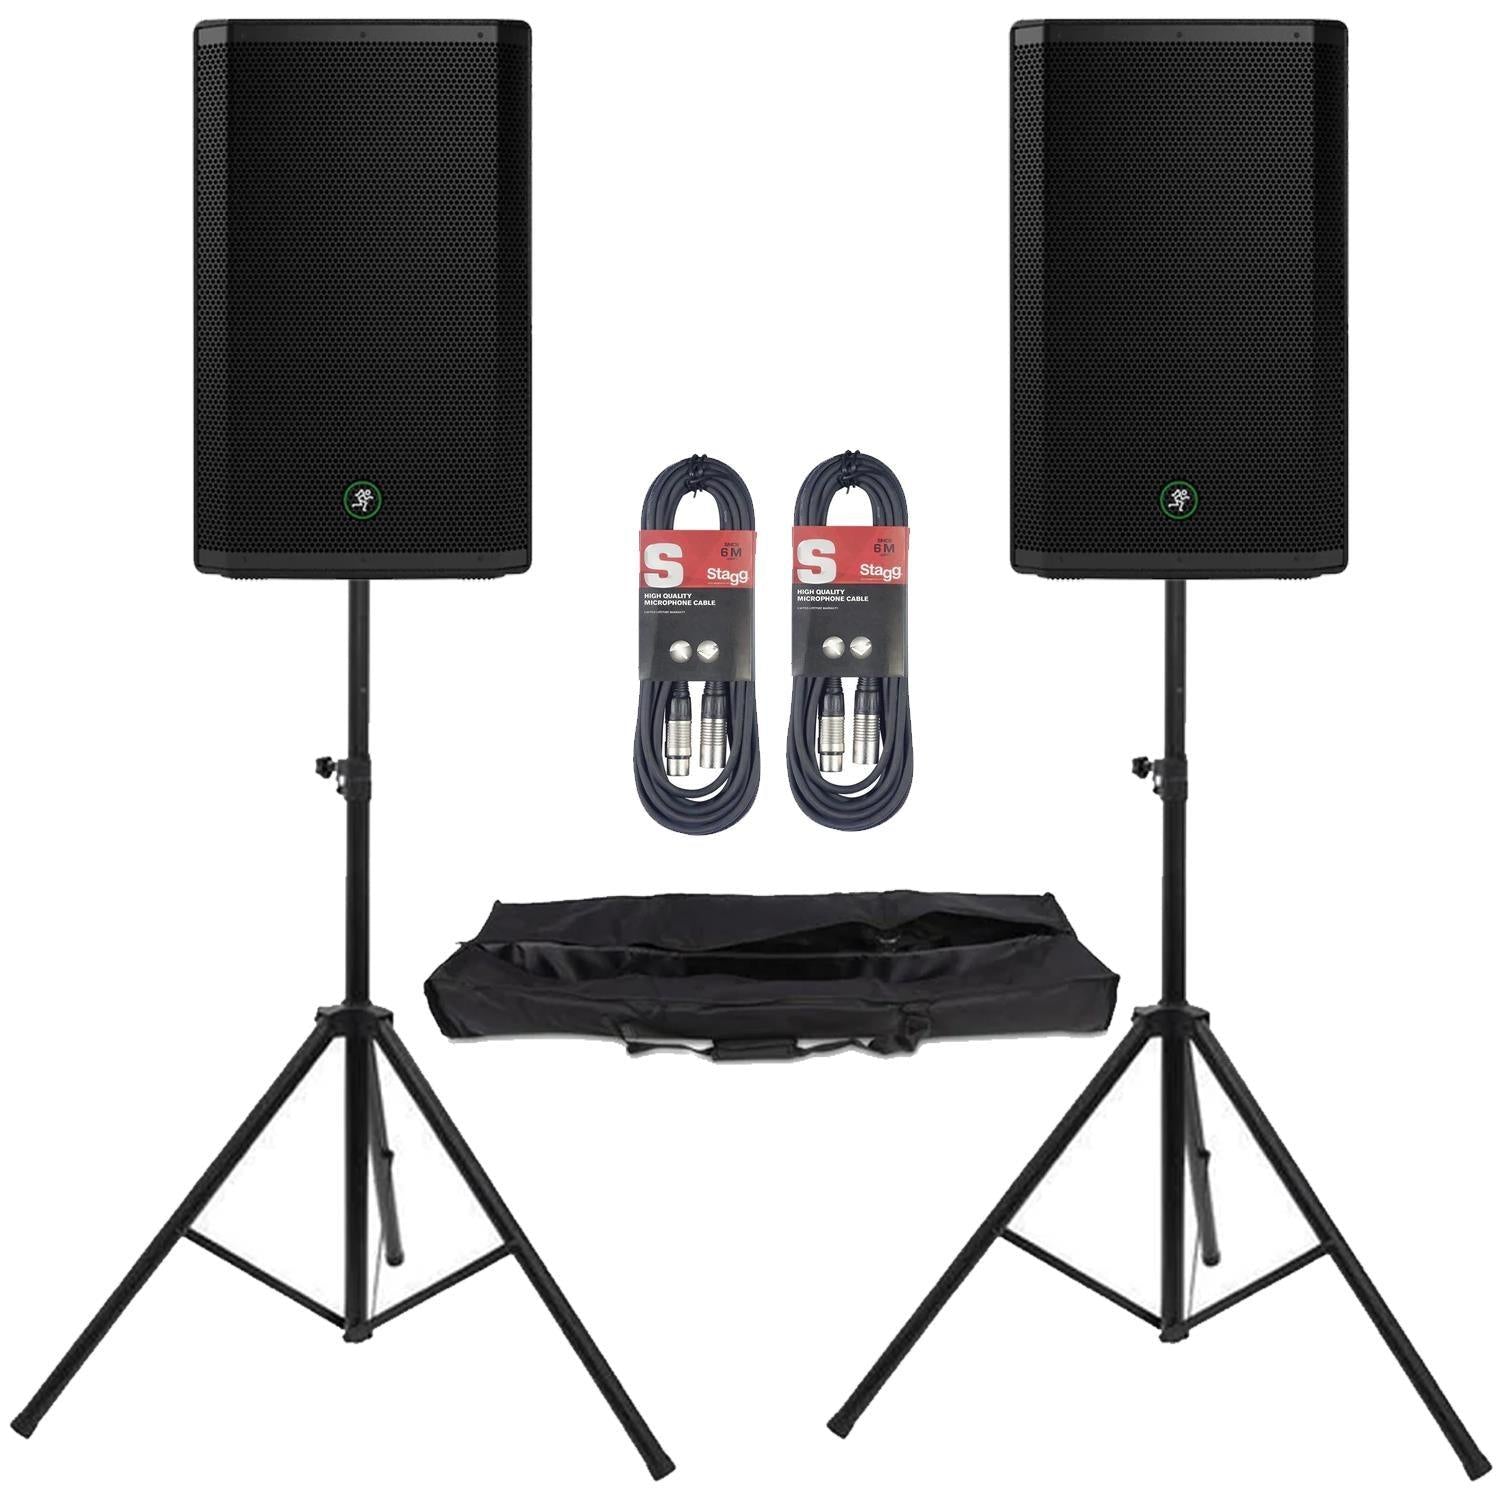 2 x Mackie Thrash 212 12" PA Speaker with Stands and Cables - DY Pro Audio